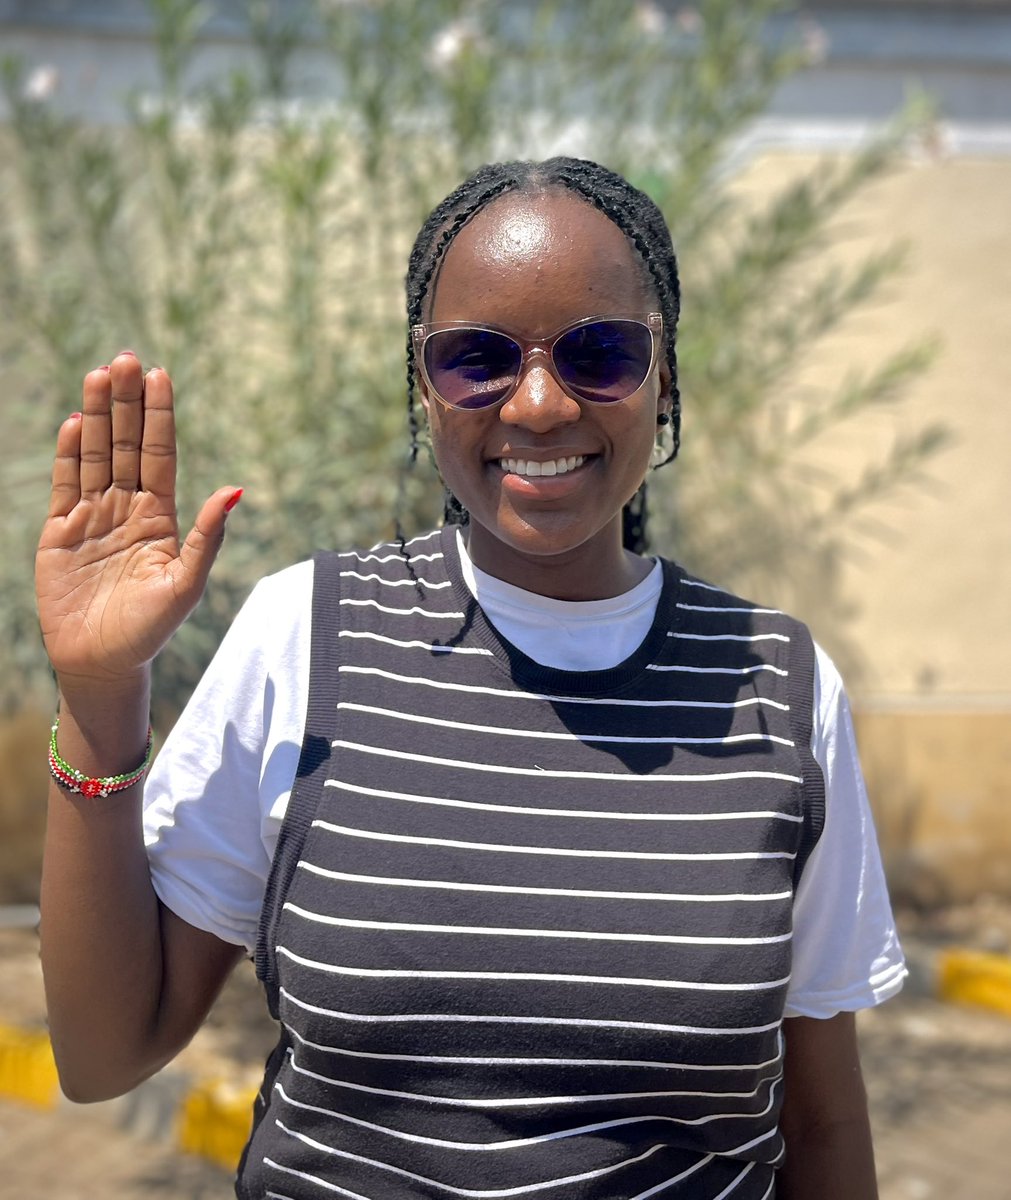 Join me & #RaiseYourHand for education! As a @GPforEducation Youth Leader, I am excited to help build political will for inclusive & gender equal education systems. 
 
Learn more about me & other GPE Youth Leaders around the world:  g.pe/FmvR50N50nC  #TransformingEducation